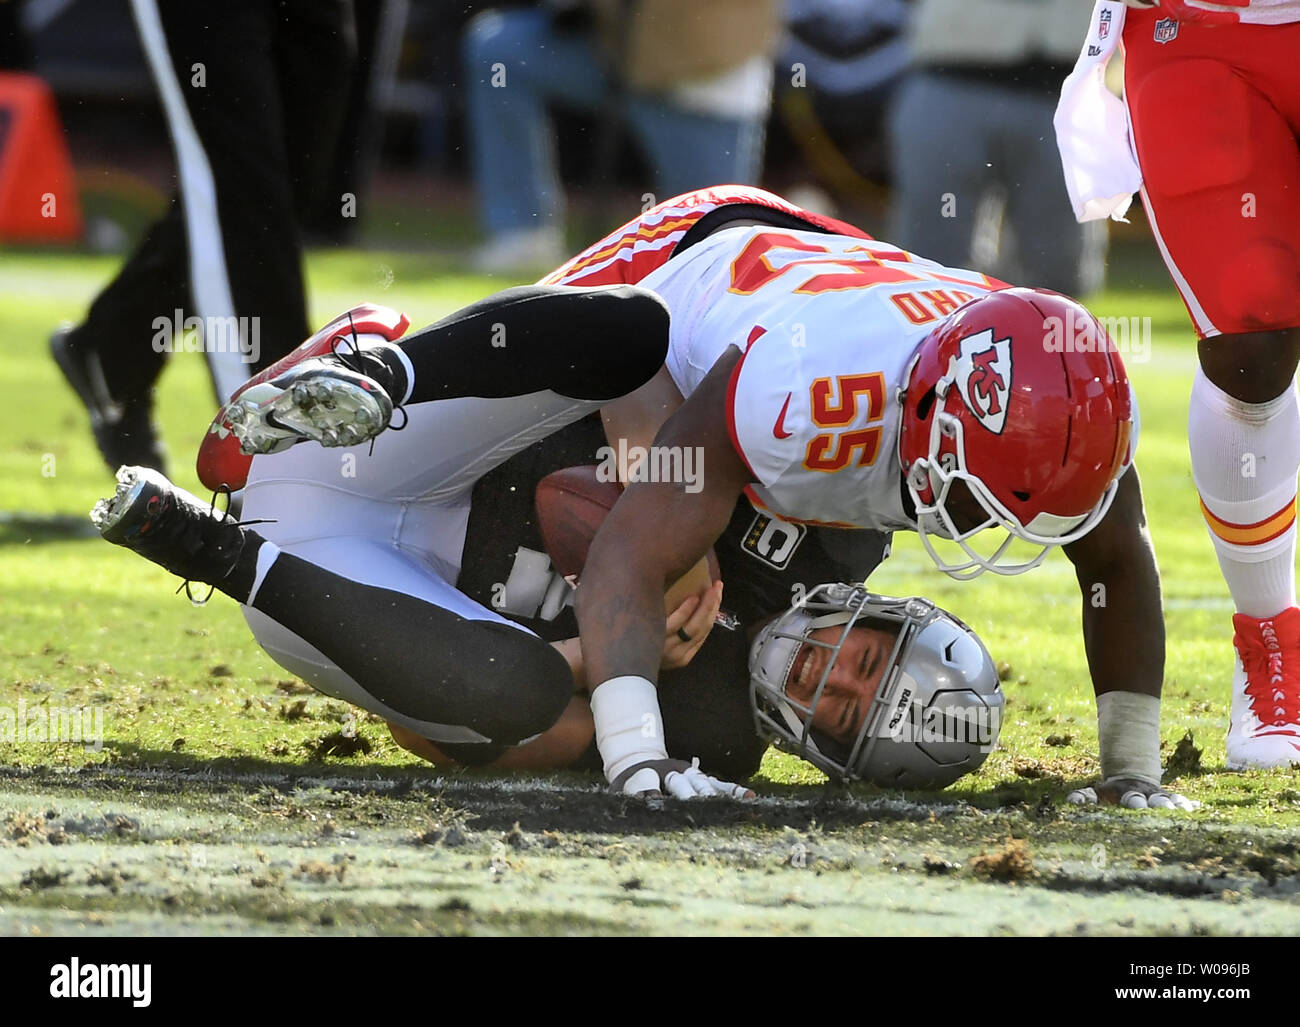 Kansas City Chiefs' linebacker Dee Ford (55) sacks Oakland Raiders quarterback Derek Carr for a loss of four yards in the first quarter at the Coliseum in Oakland, California on December 2, 2018. The Chiefs defeated the Raiders 40-33.    Photo by Terry Schmitt/UPI Stock Photo